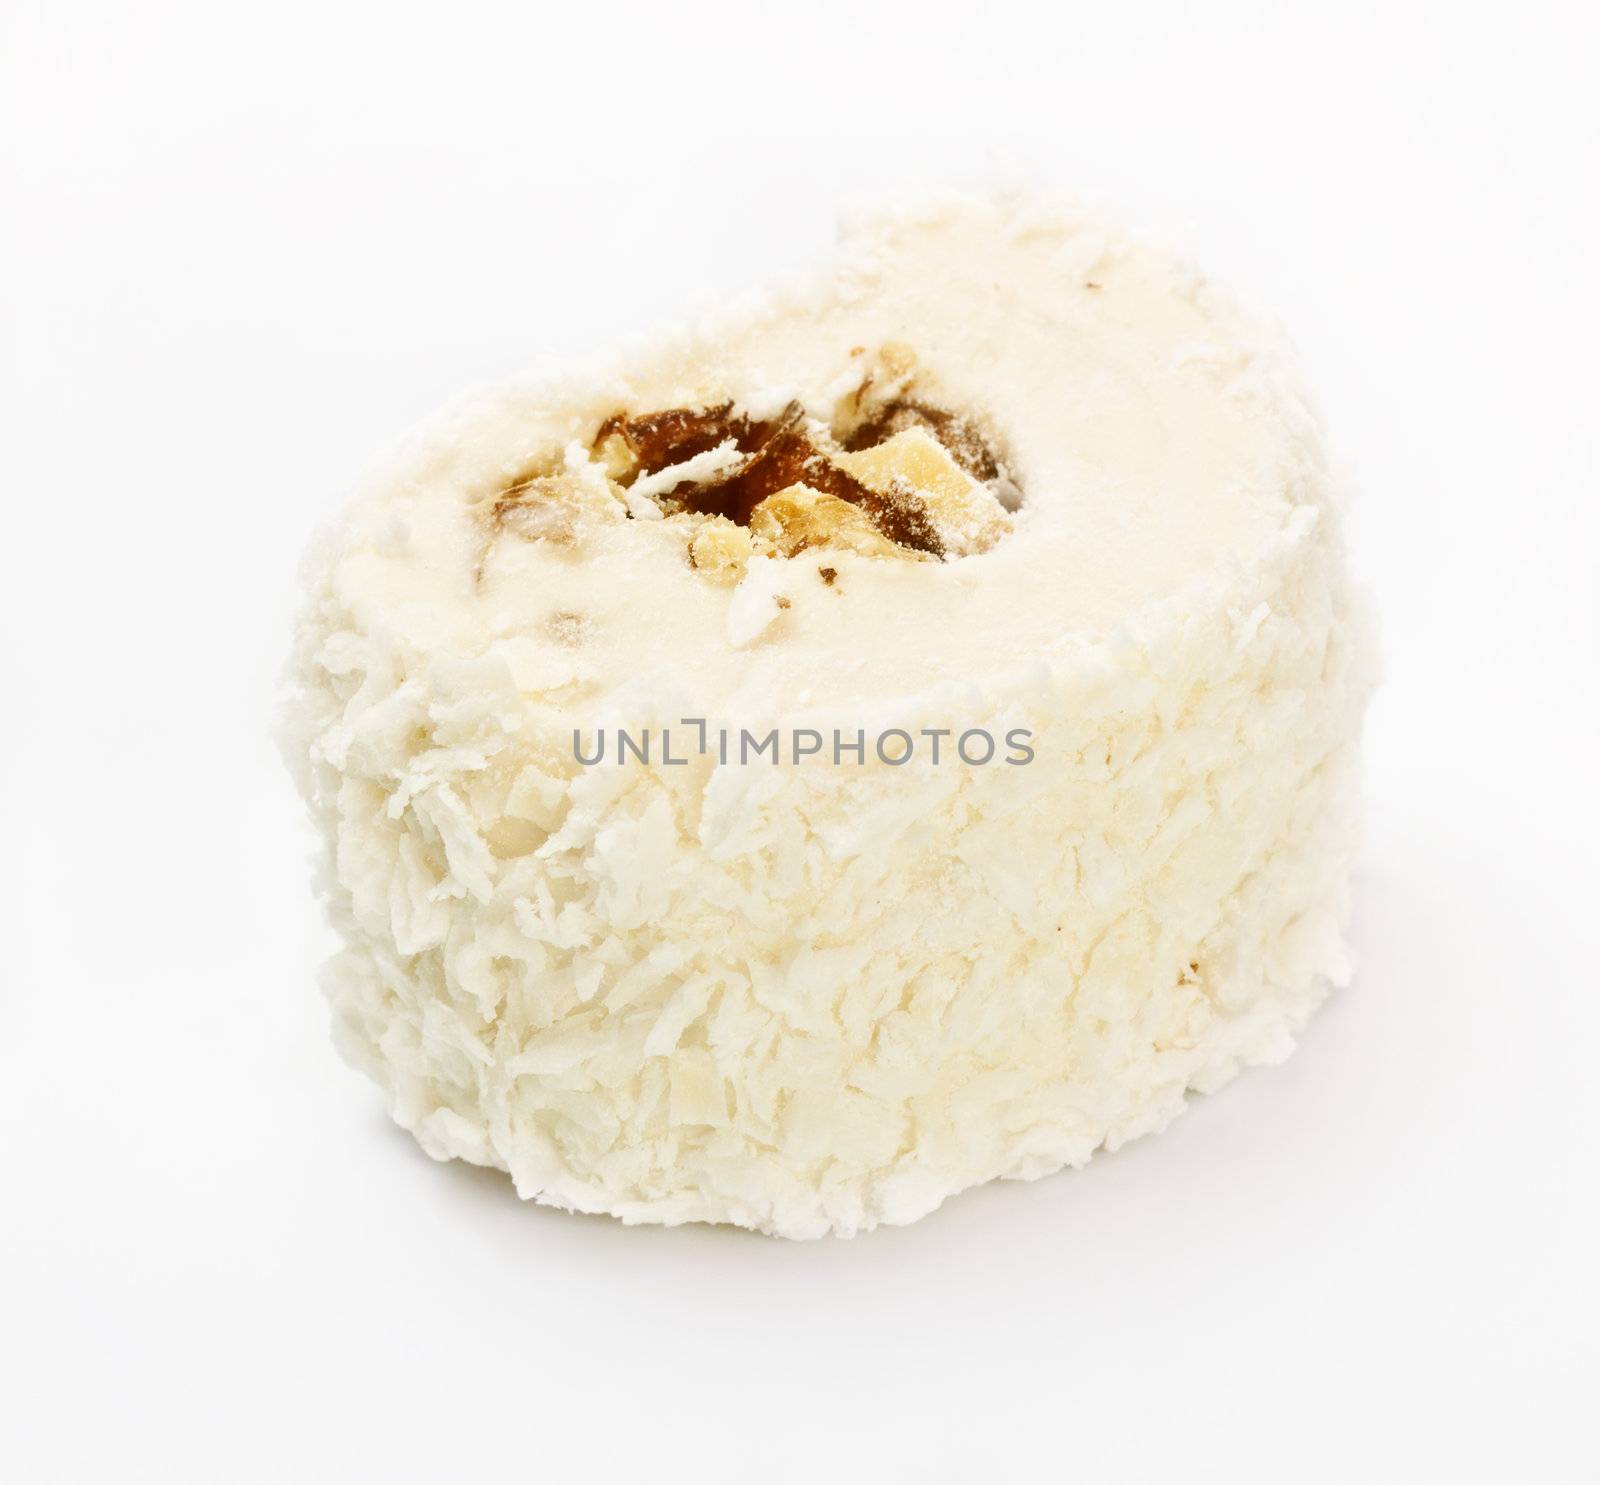 nougat candy with nut in dessicated coconut